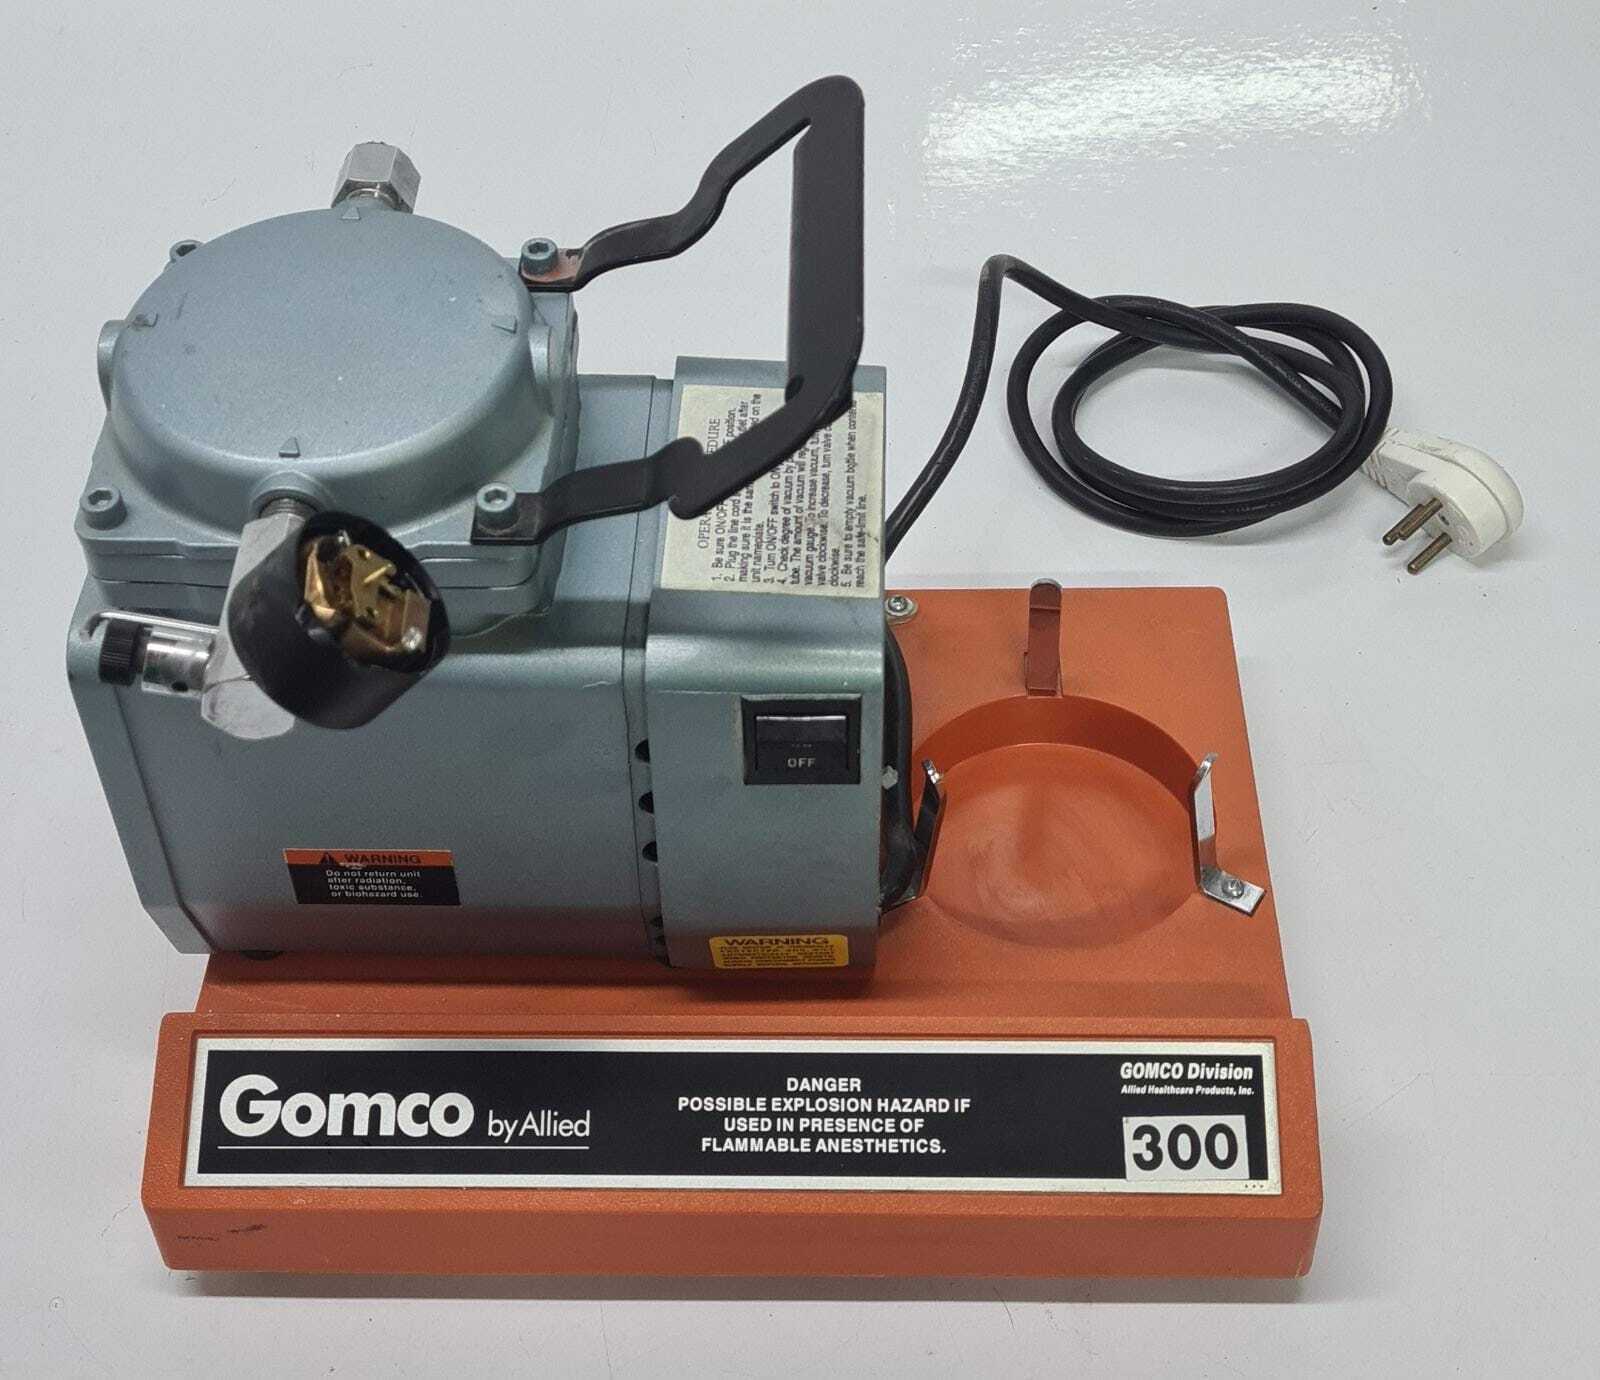 Allied Gomco 300 Suction Vacuum Aspirator Lab Pump Table Top Portable